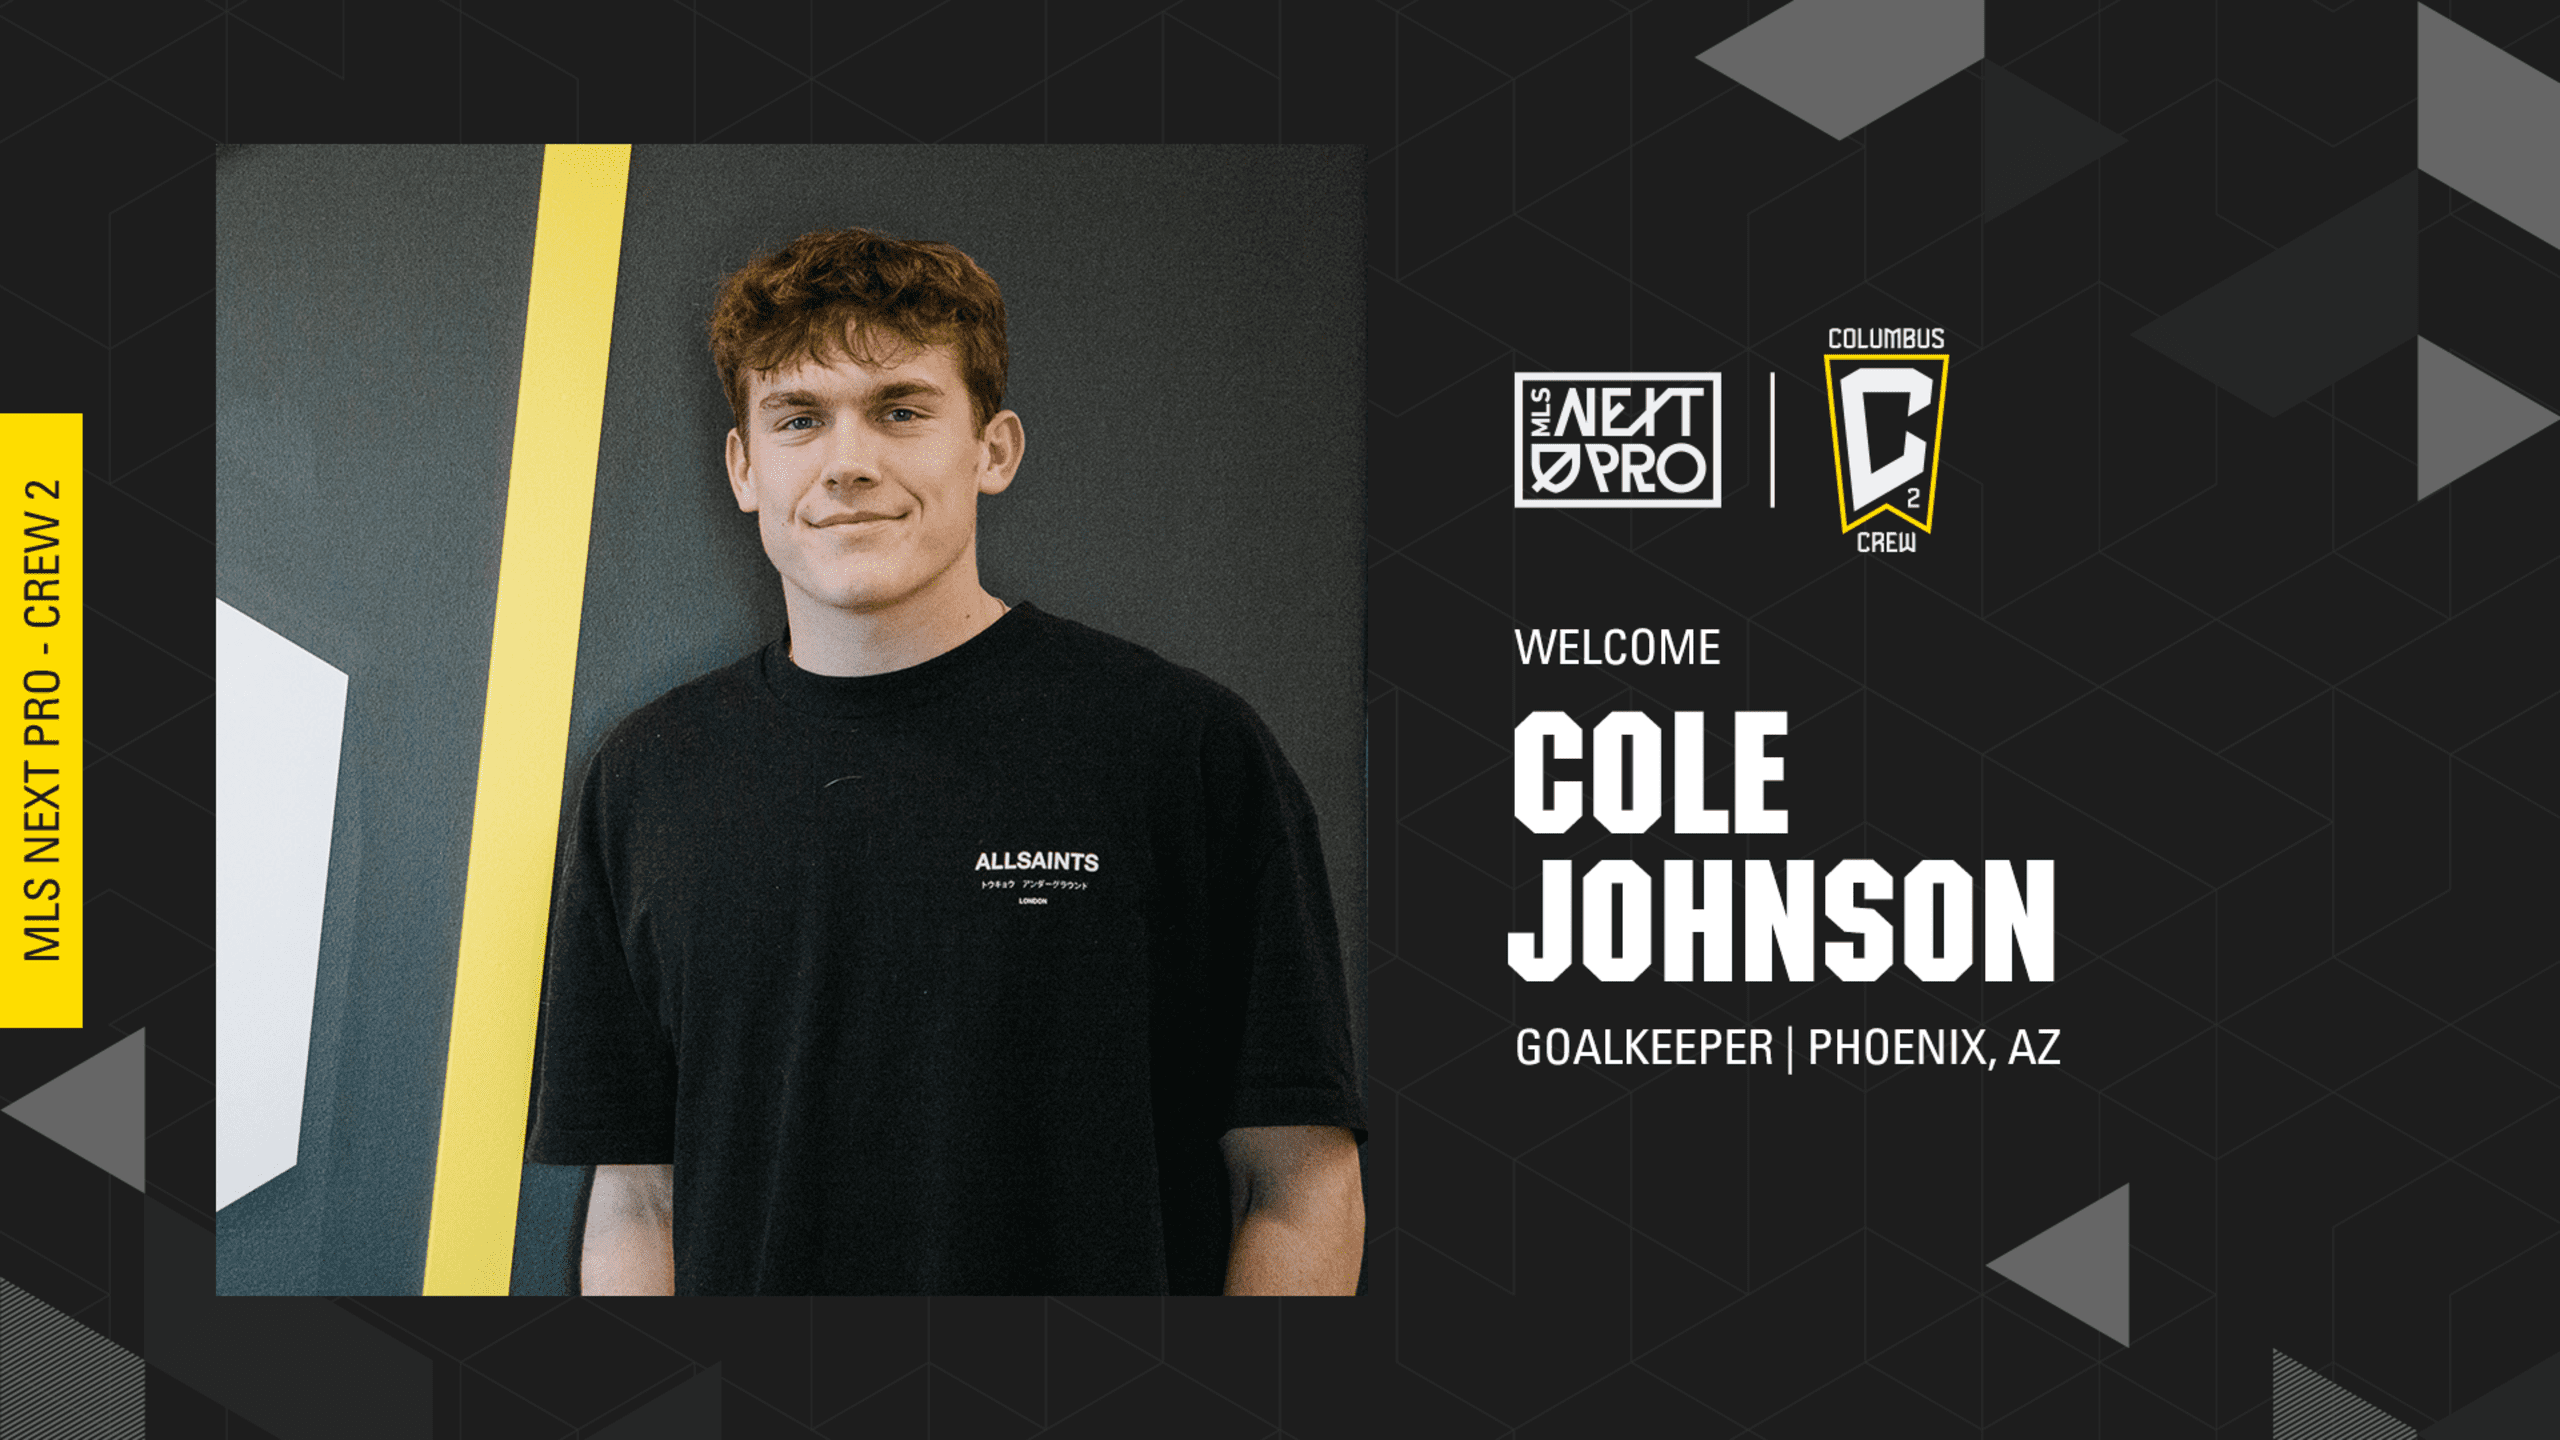 "Skilled shot-stopper" Cole Johnson signs for Columbus Crew 2 